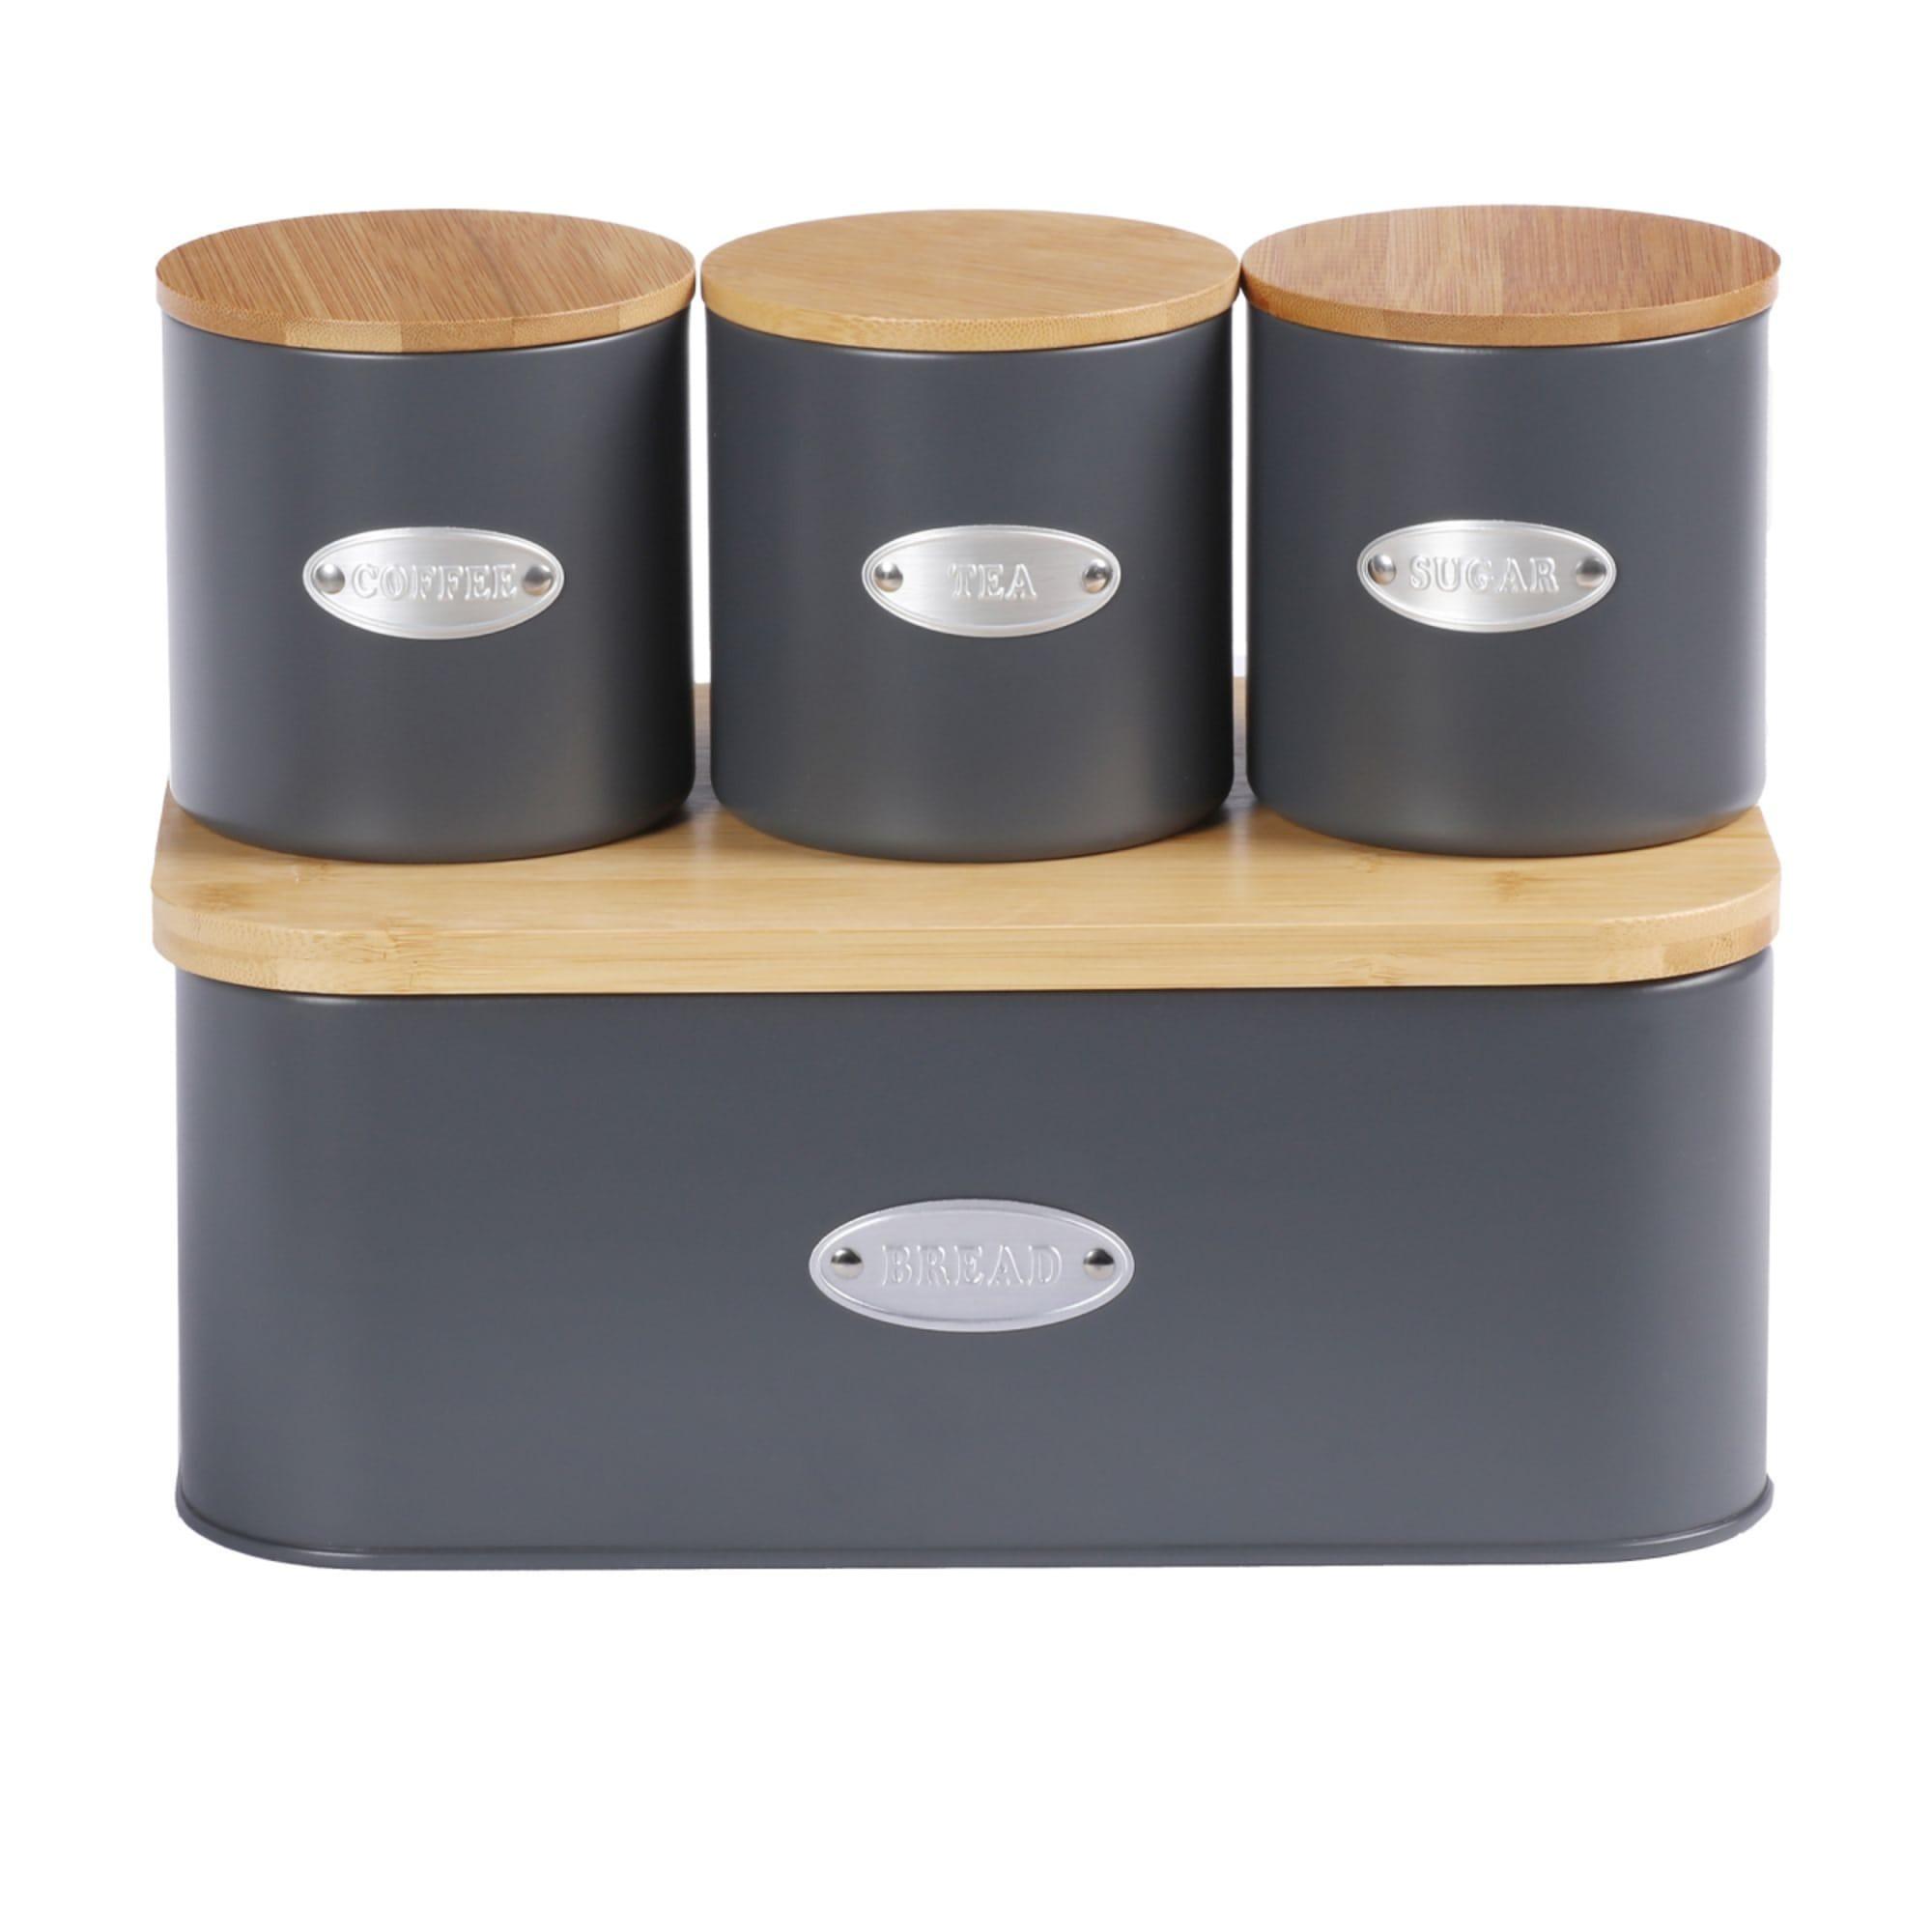 Sherwood Home Bread Box and Canister Set 4pc Image 1